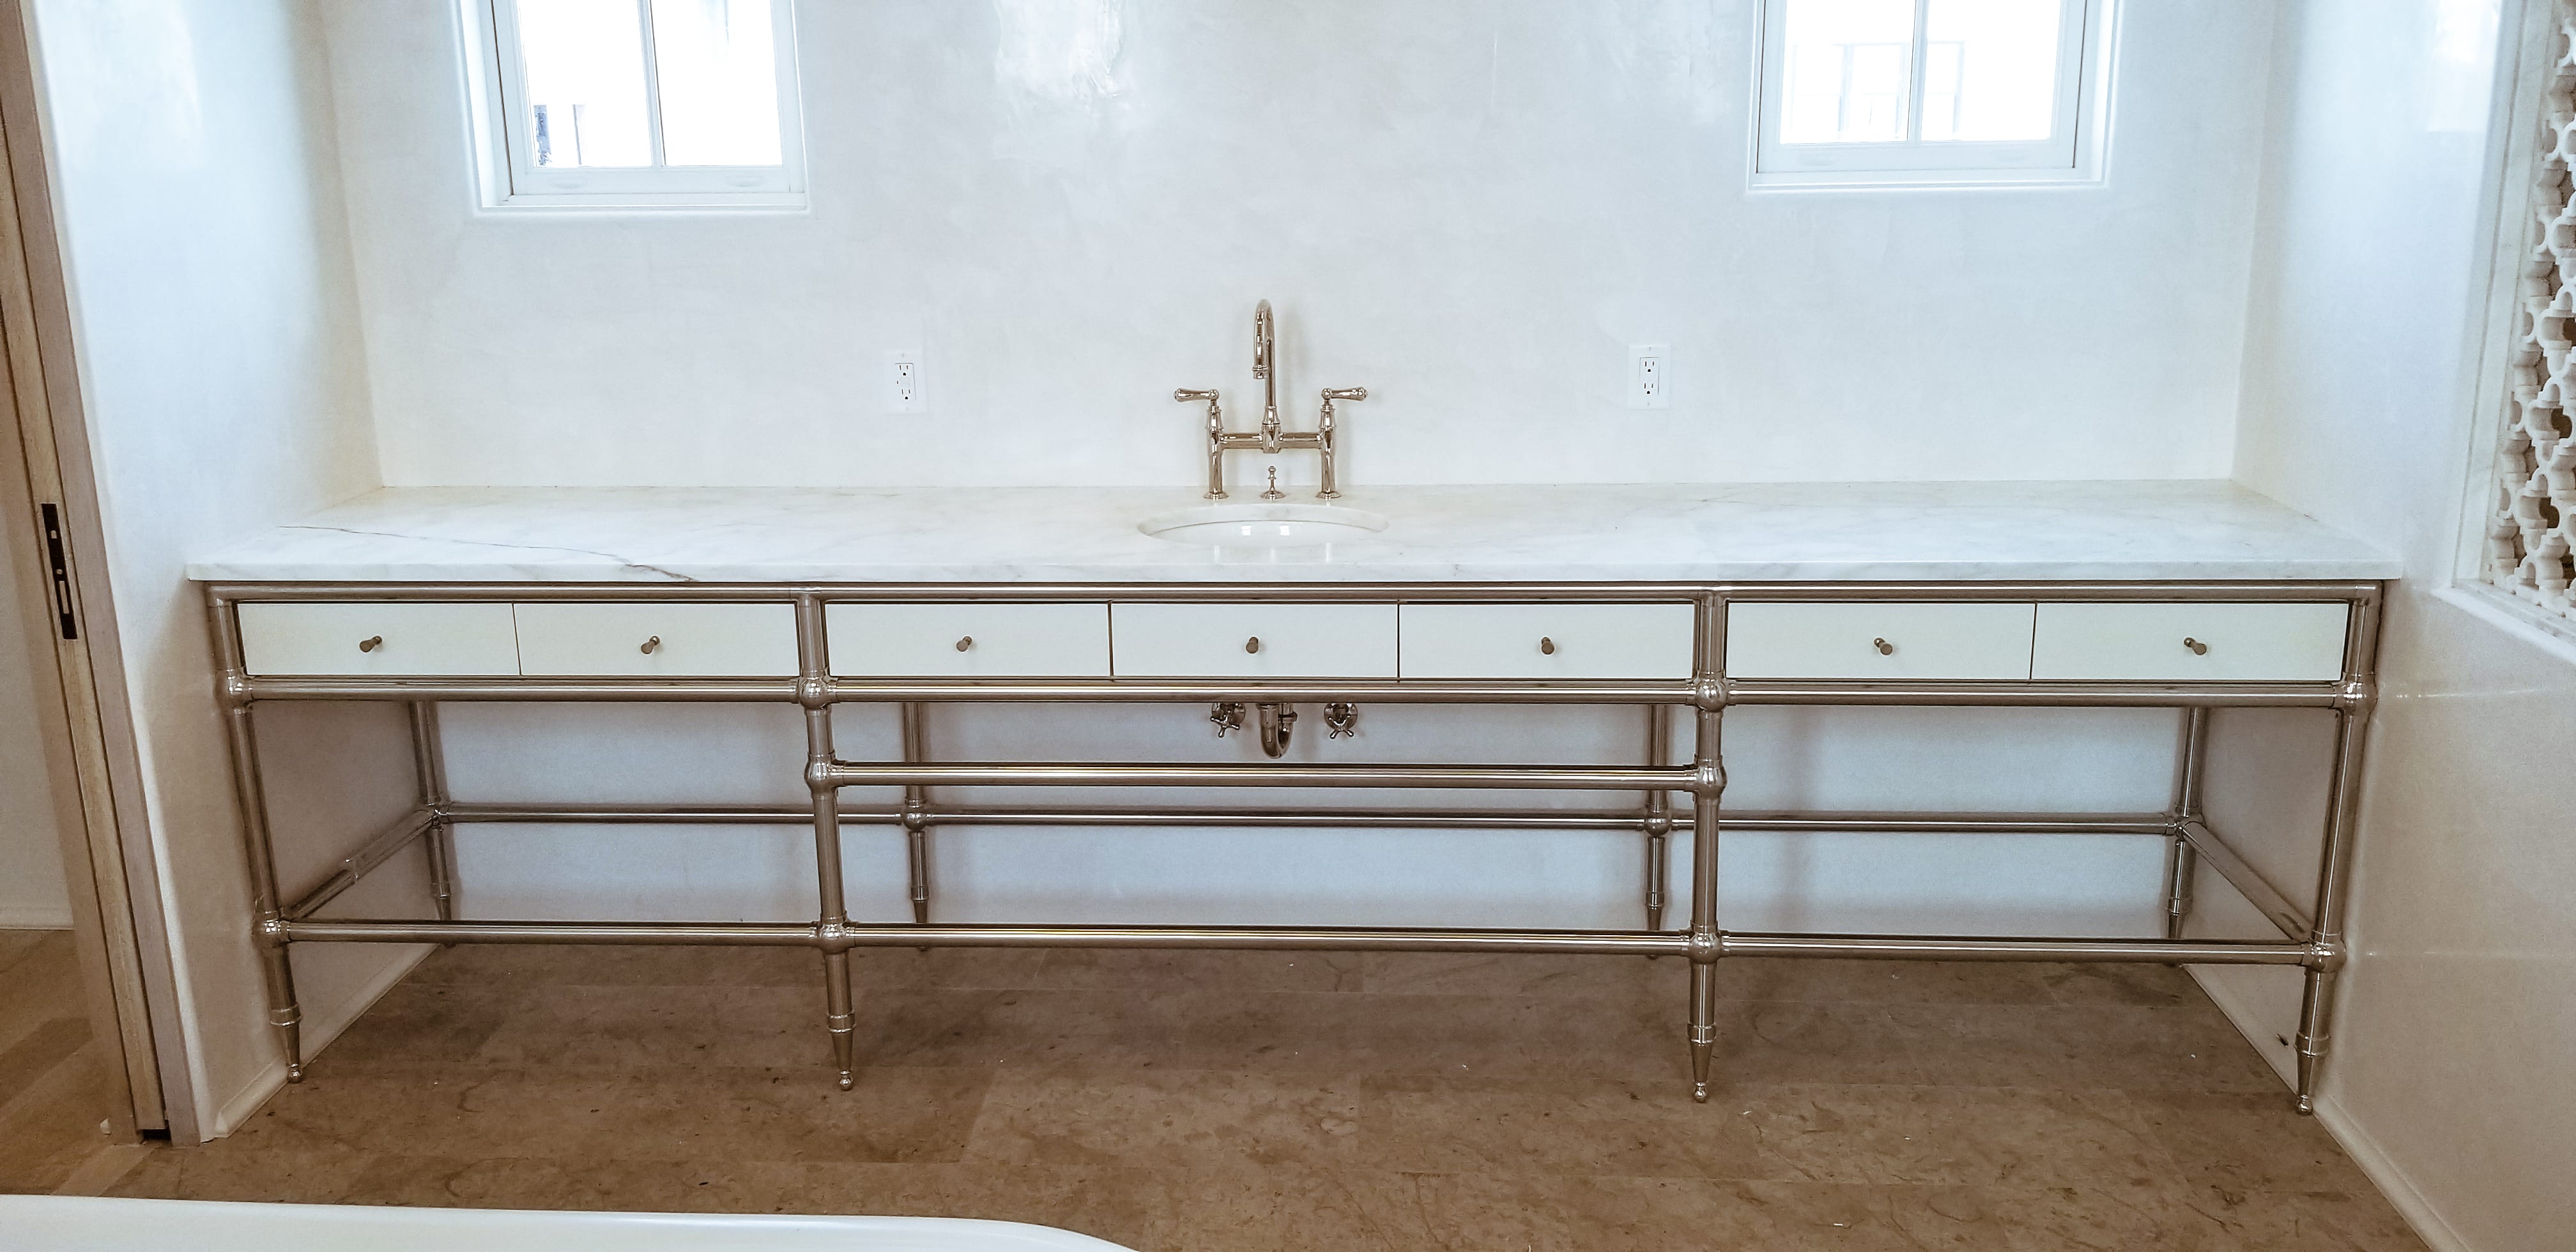 White vanity with metal rod detailing front view